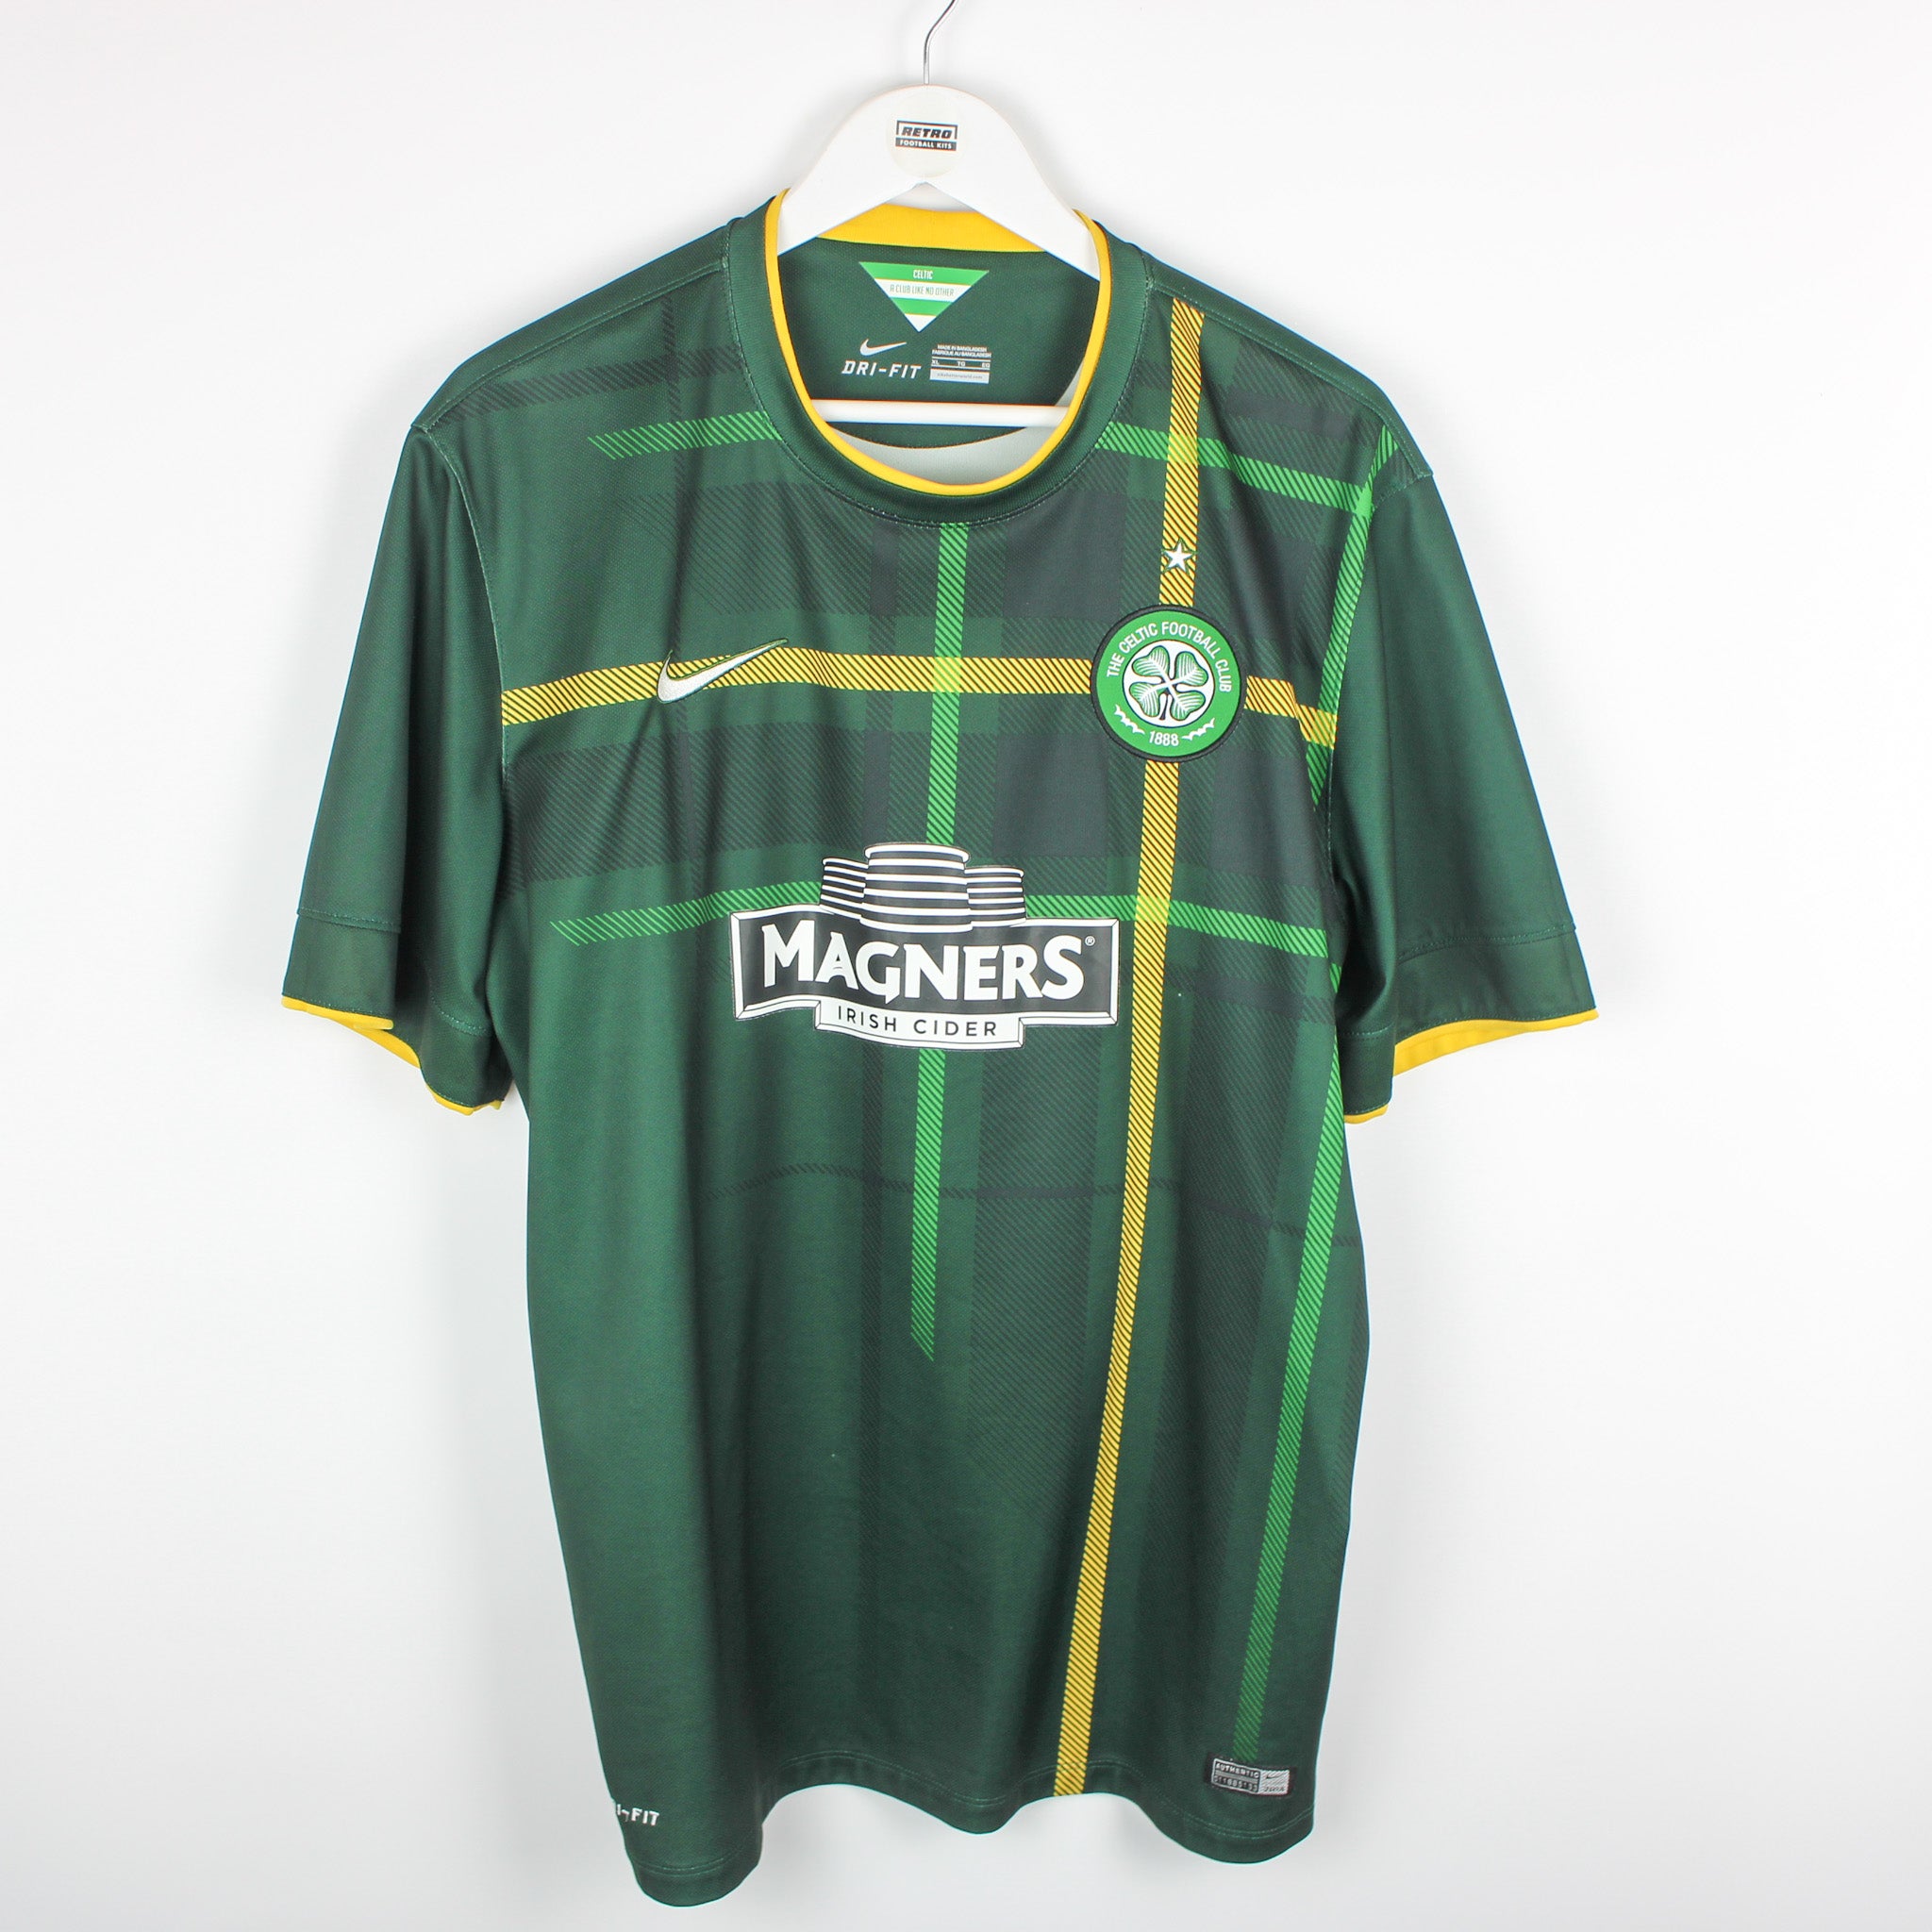 Celtic unveil new Nike away kit for 2014/15